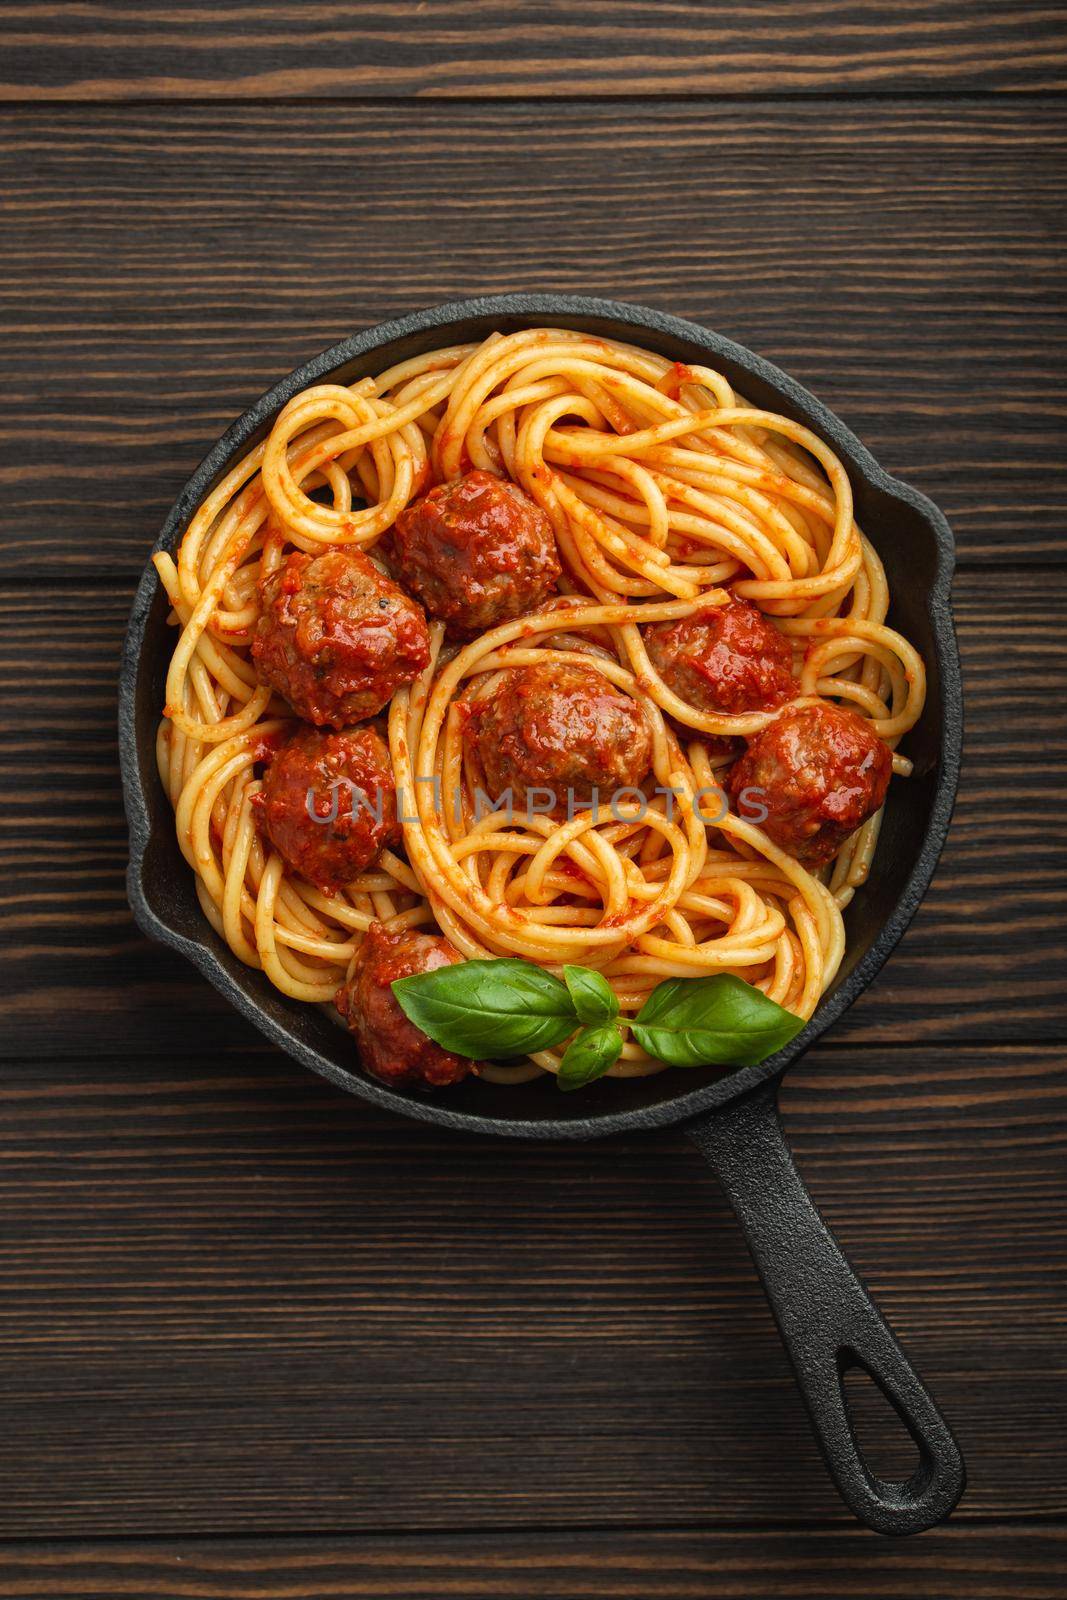 Top view of delicious pasta with meatballs, tomato sauce and fresh basil in cast iron rustic vintage pan served on cutting board, wooden background. Tasty homemade meatballs spaghetti